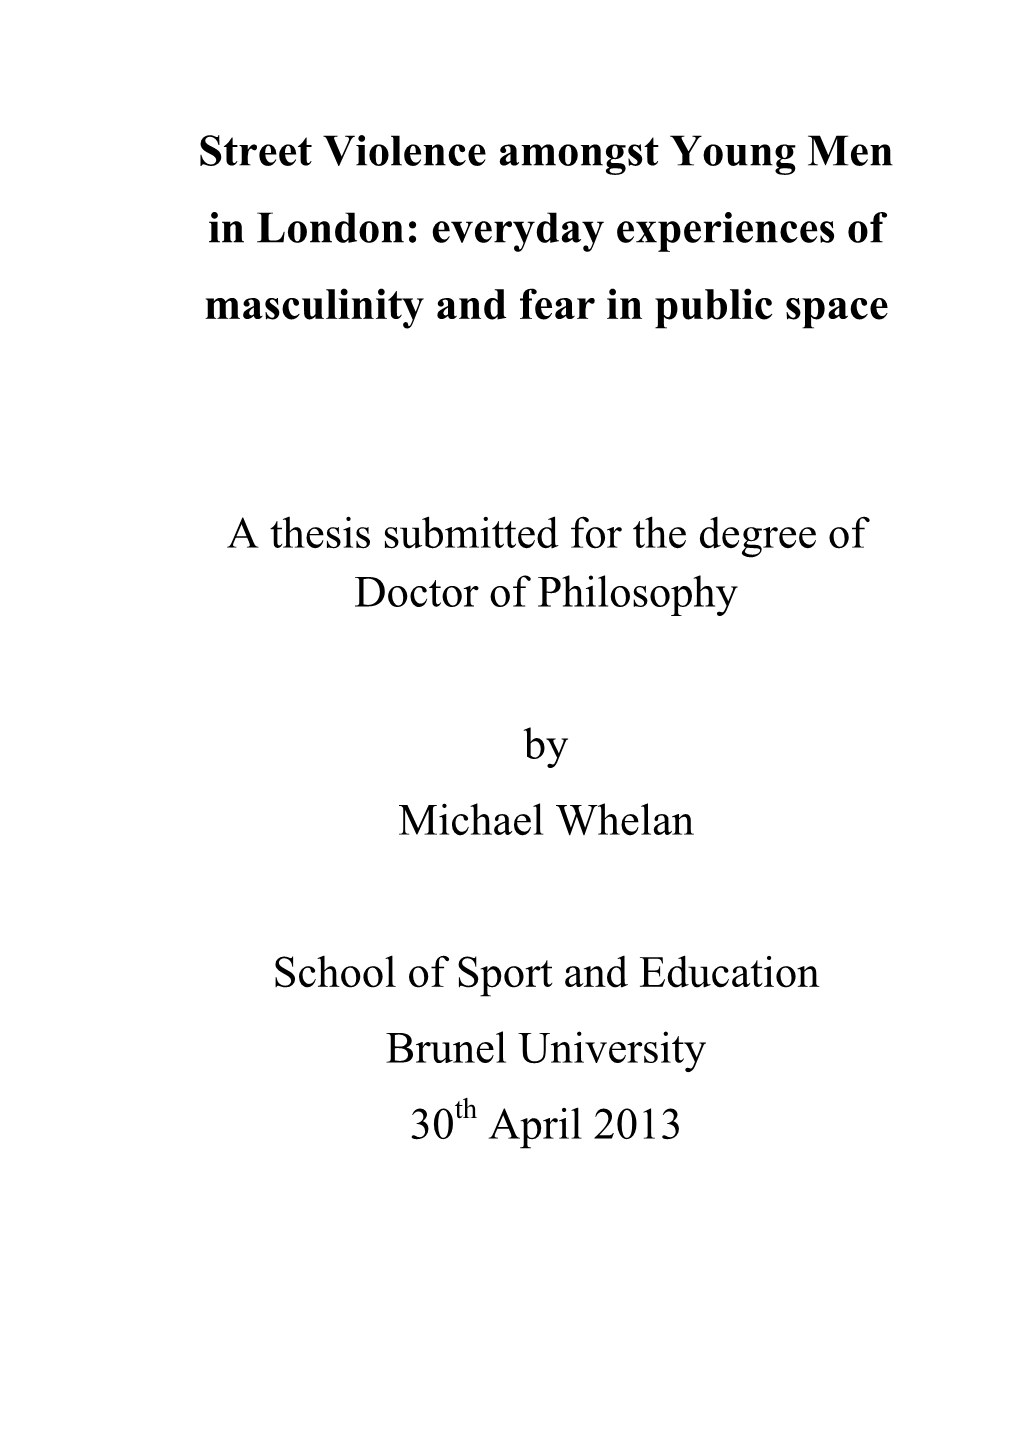 Street Violence Amongst Young Men in London: Everyday Experiences of Masculinity and Fear in Public Space